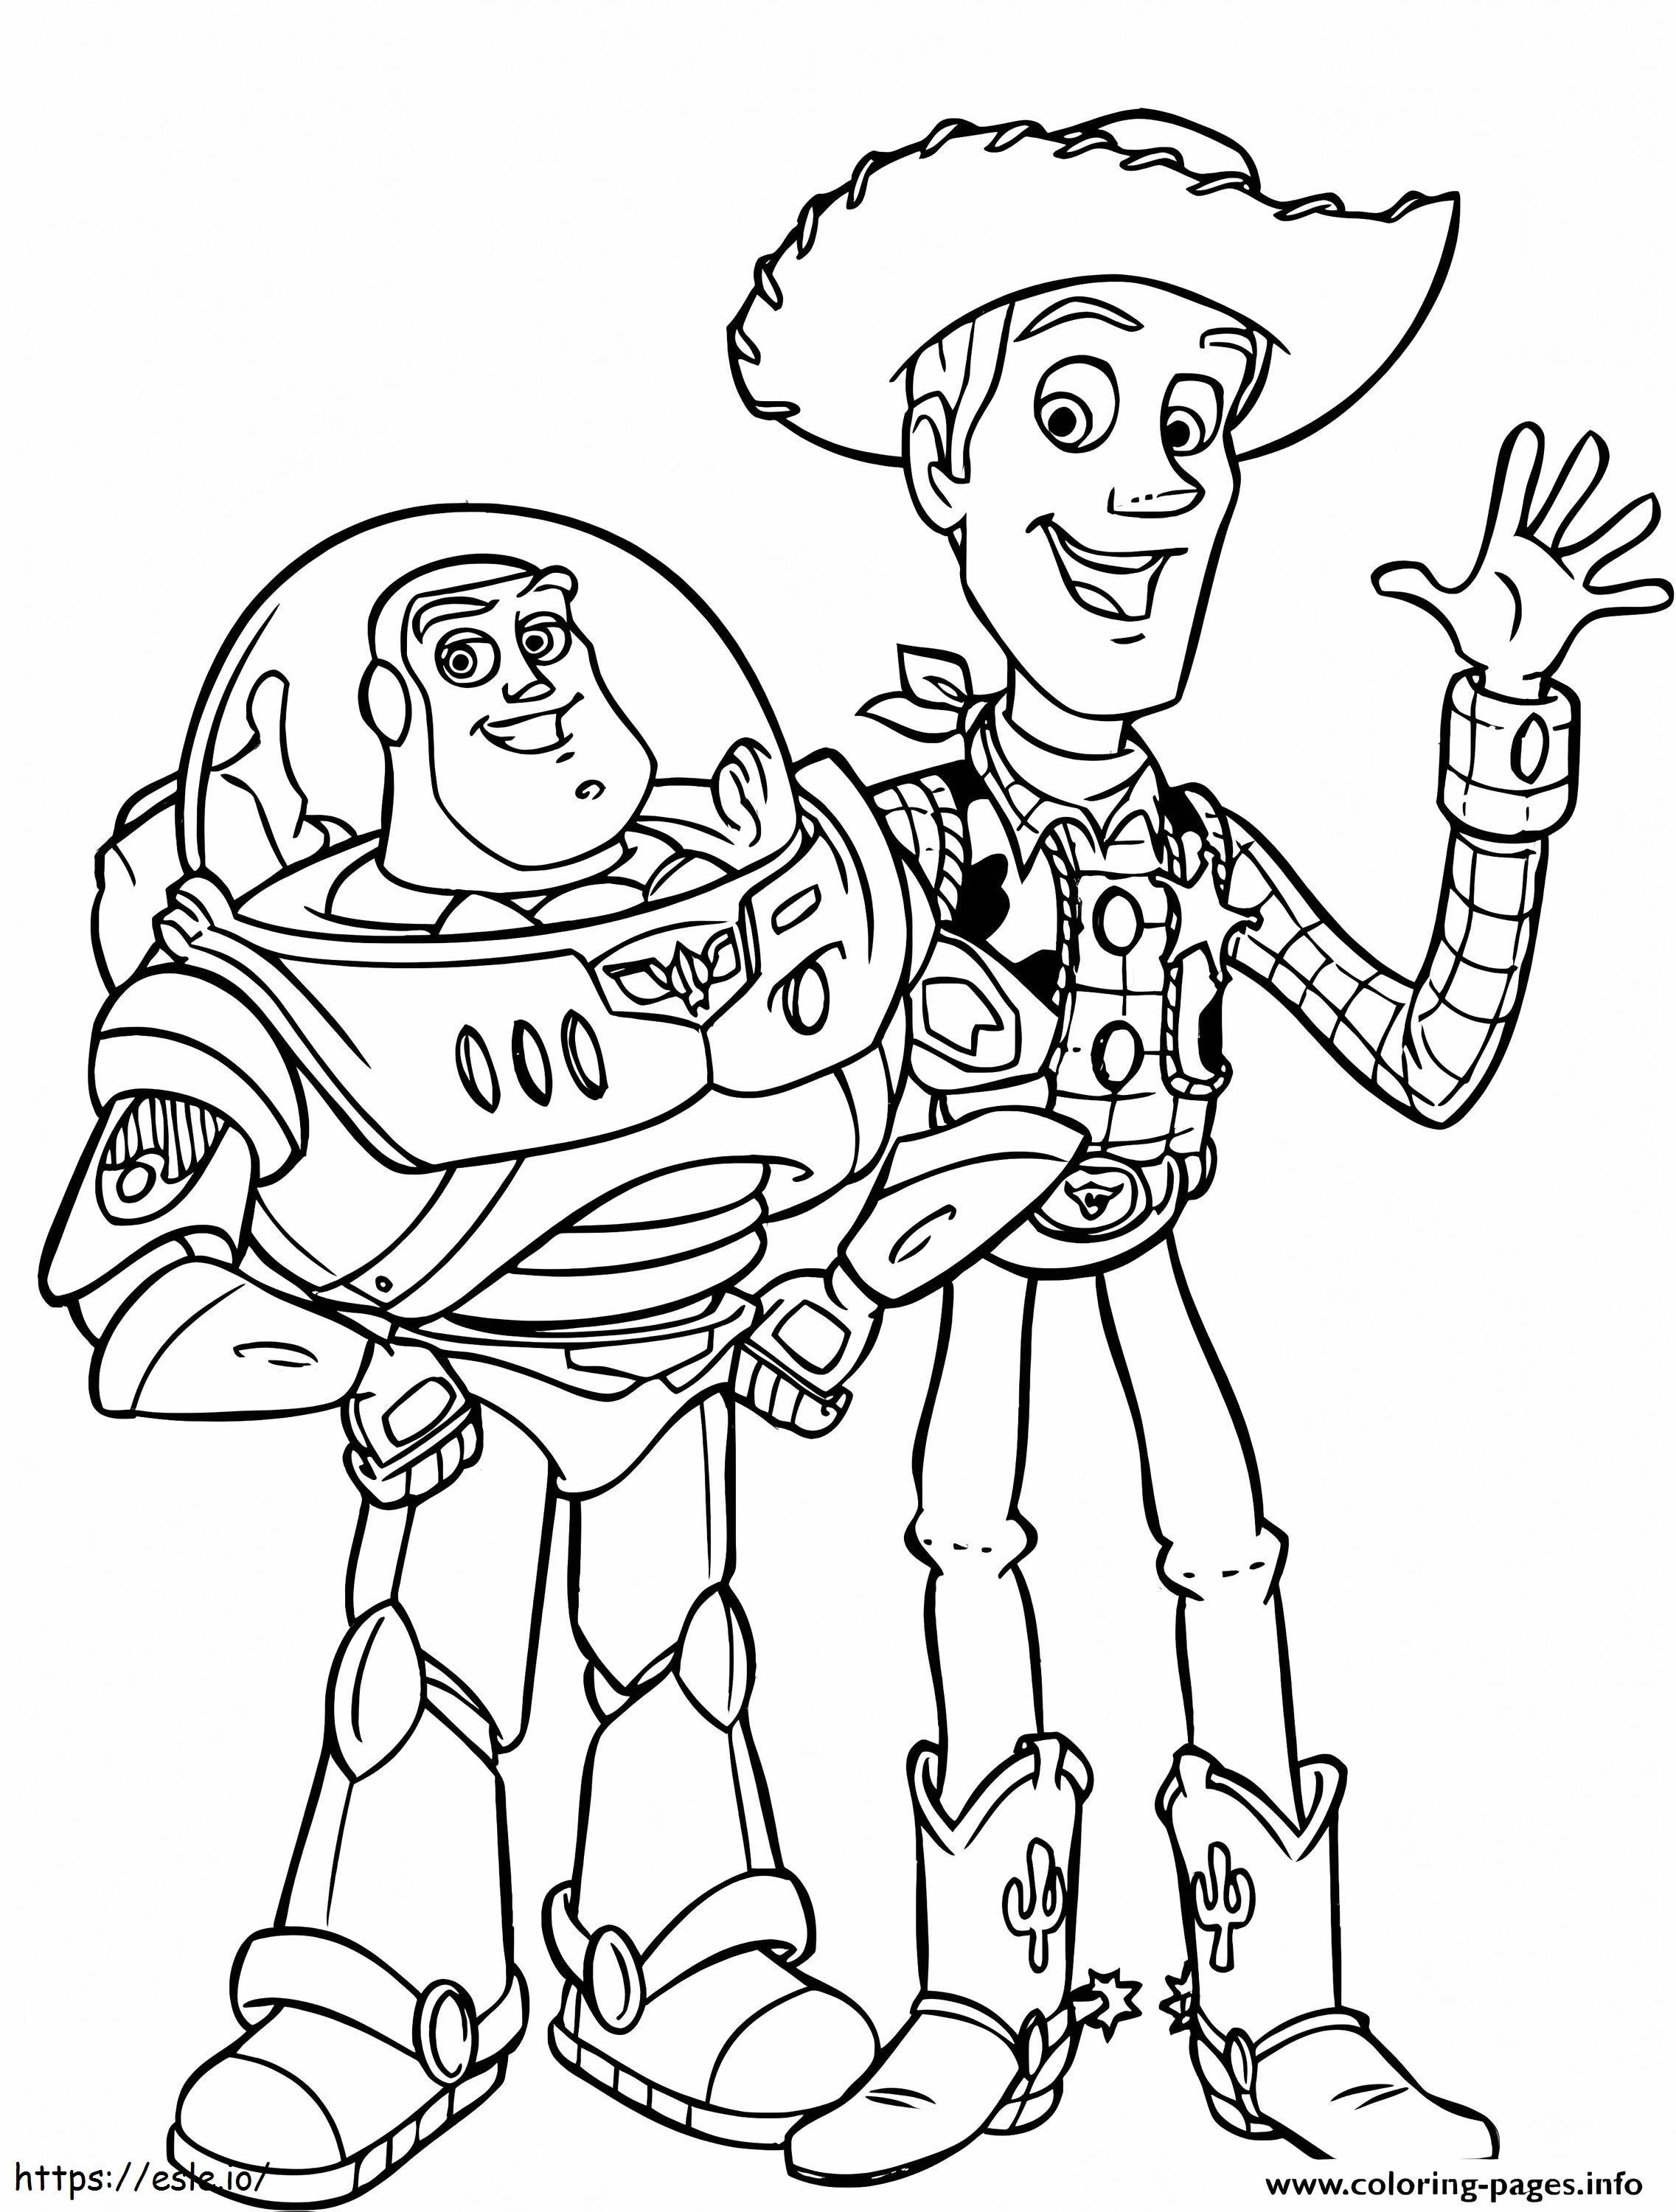 Woody And Buzz Fun coloring page